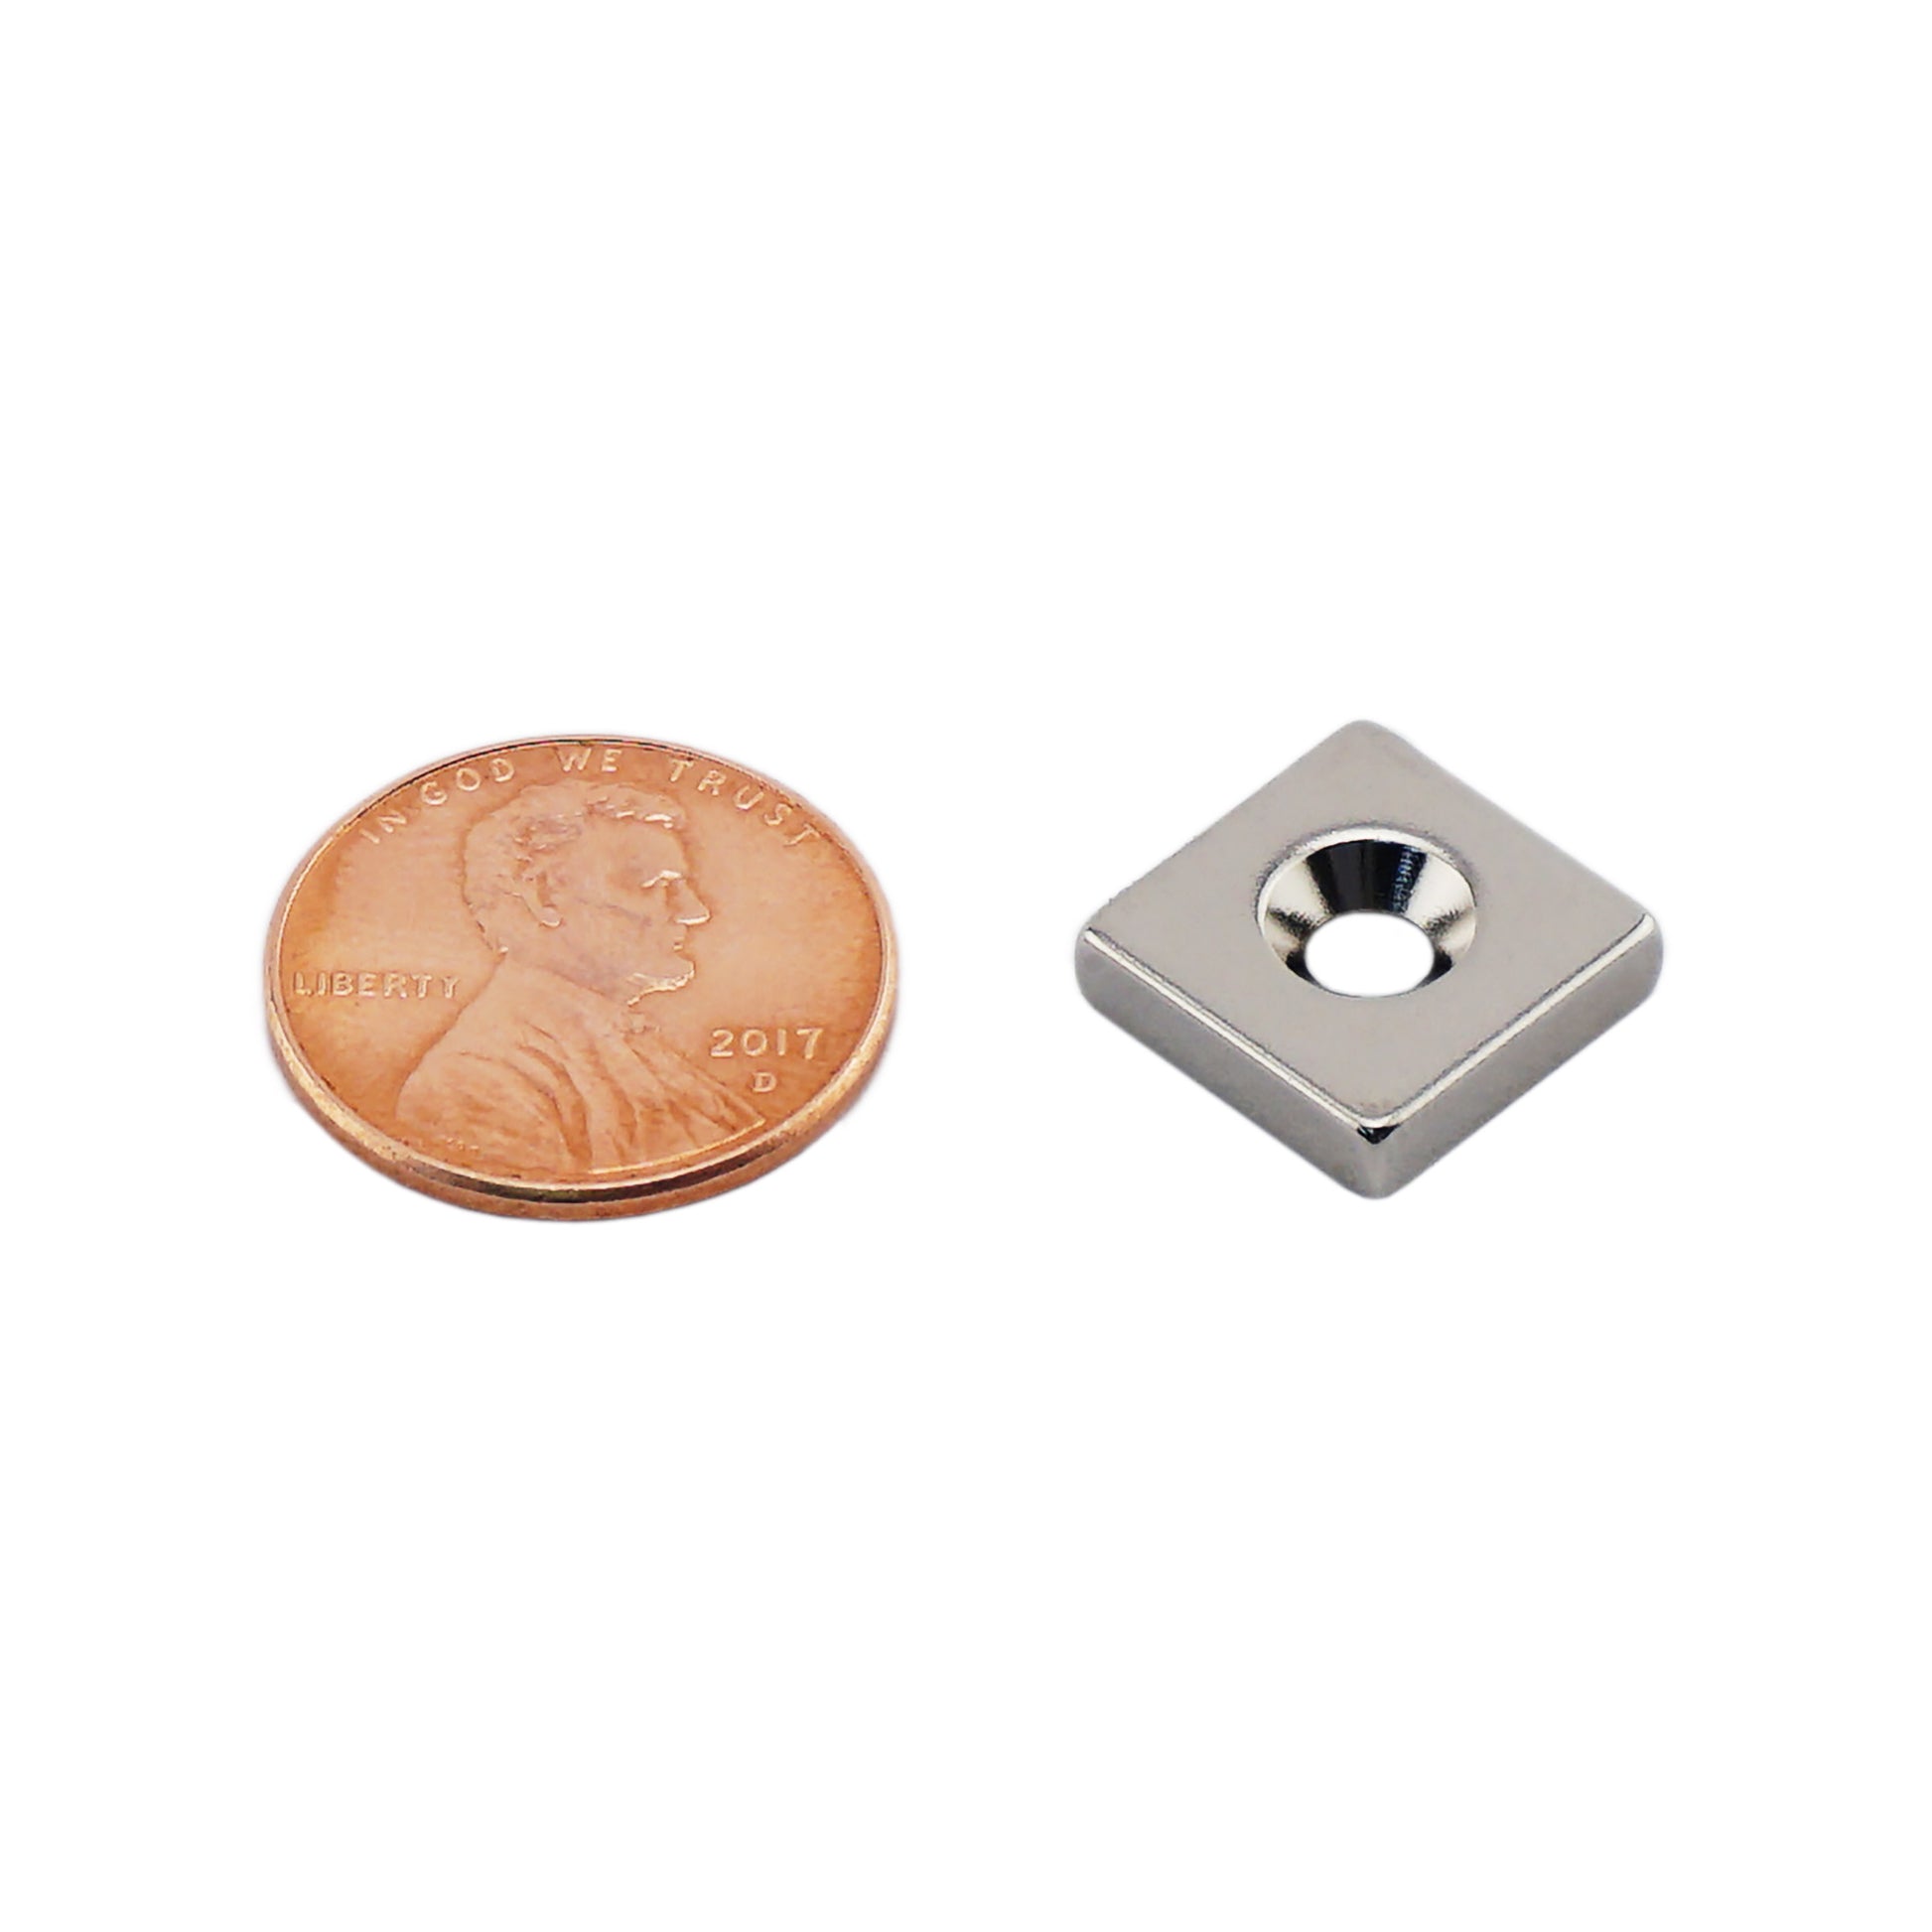 Load image into Gallery viewer, NB001218NCTS Neodymium Countersunk Block Magnet - Compared to Penny for Size Reference